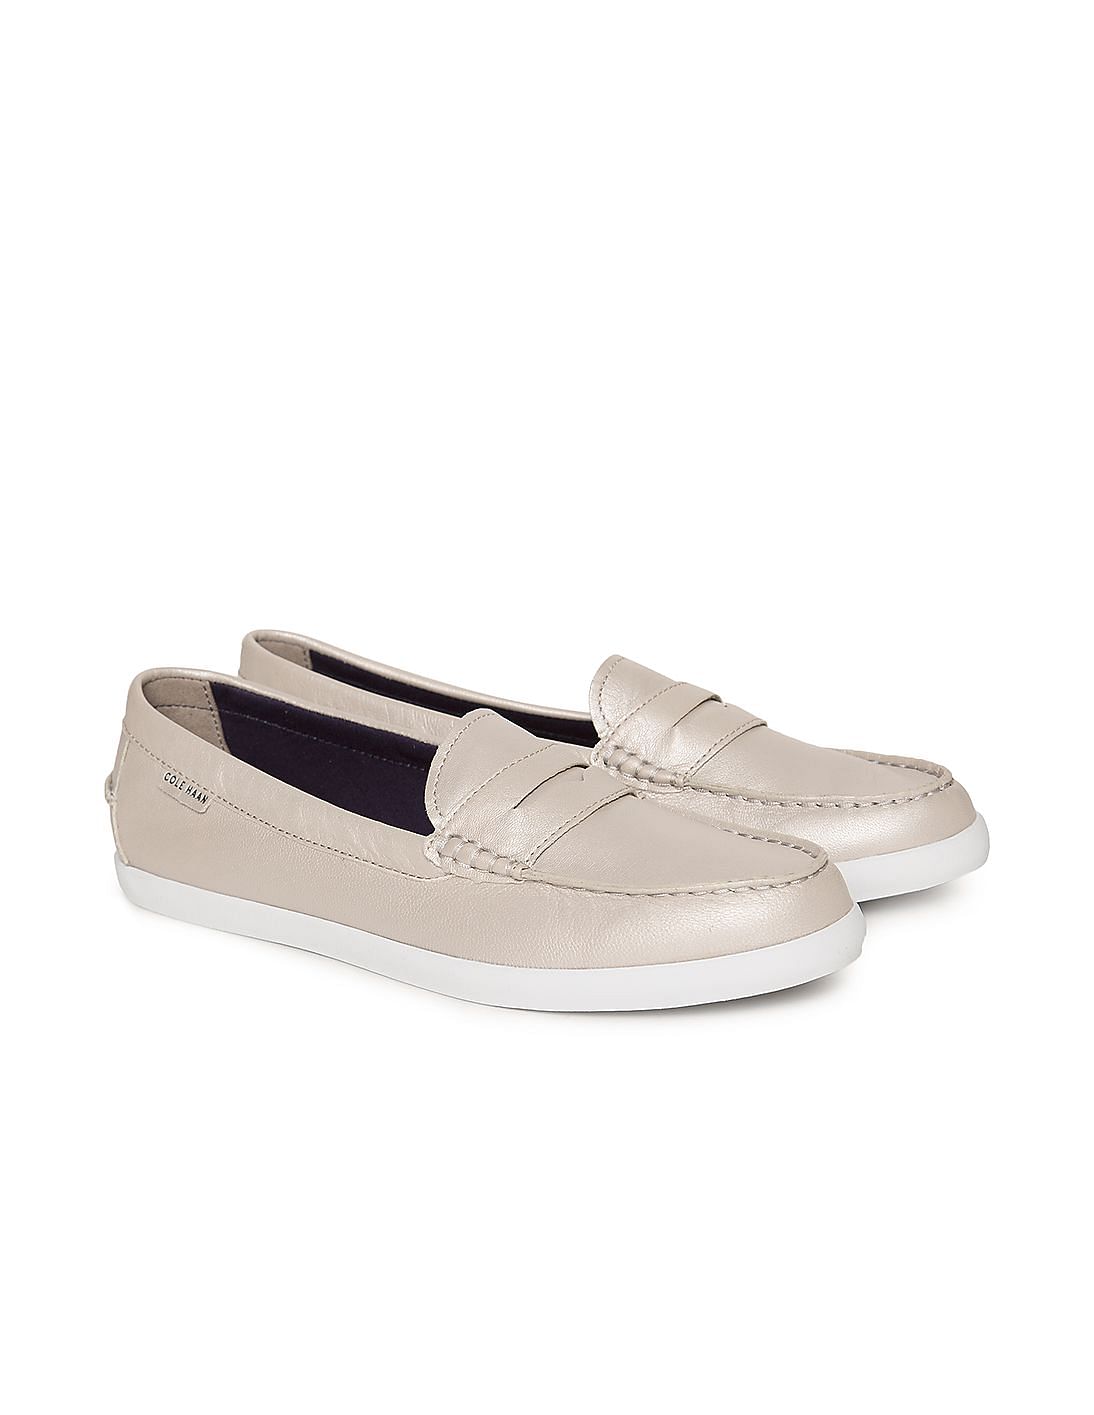 Buy Cole Haan Nantucket Leather Penny Loafers - NNNOW.com